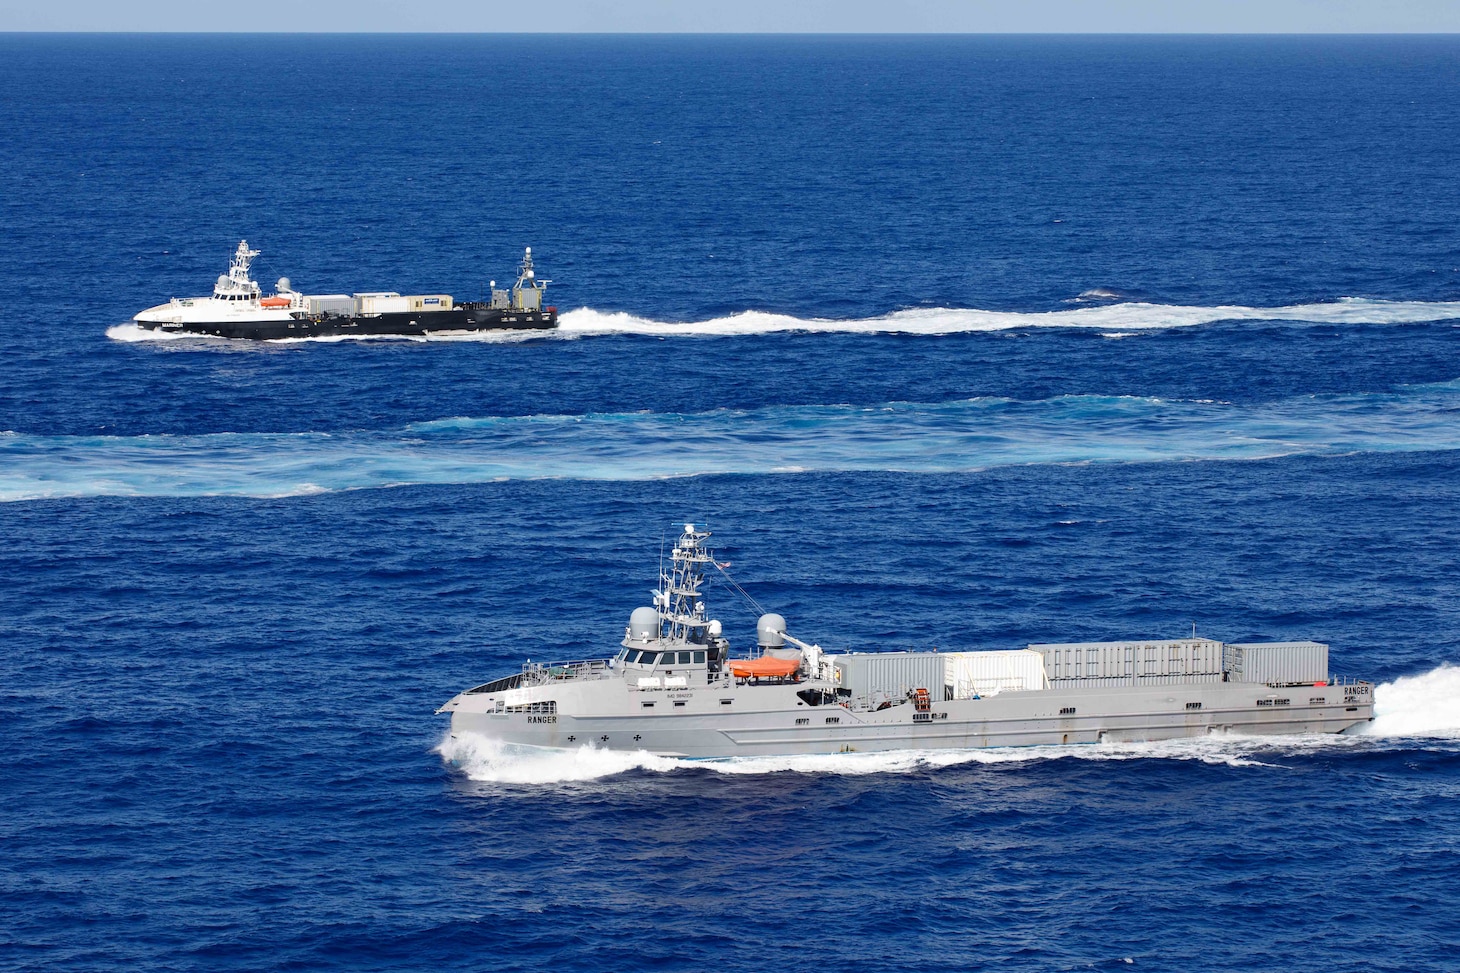 The unmanned surface vessel (USV) Ranger steams alongside the USV Mariner as both ships transit the Pacific Ocean during a photo exercise as part of Integrated Battle Problem (IBP) 23.2, Sep. 7, 2023. IBP 23.2 is a Pacific Fleet exercise to test, develop and evaluate the integration of unmanned platforms into fleet operations to create warfighting advantages. (U.S. Navy photo by Mass Communication Specialist 2nd Class Jesse Monford)